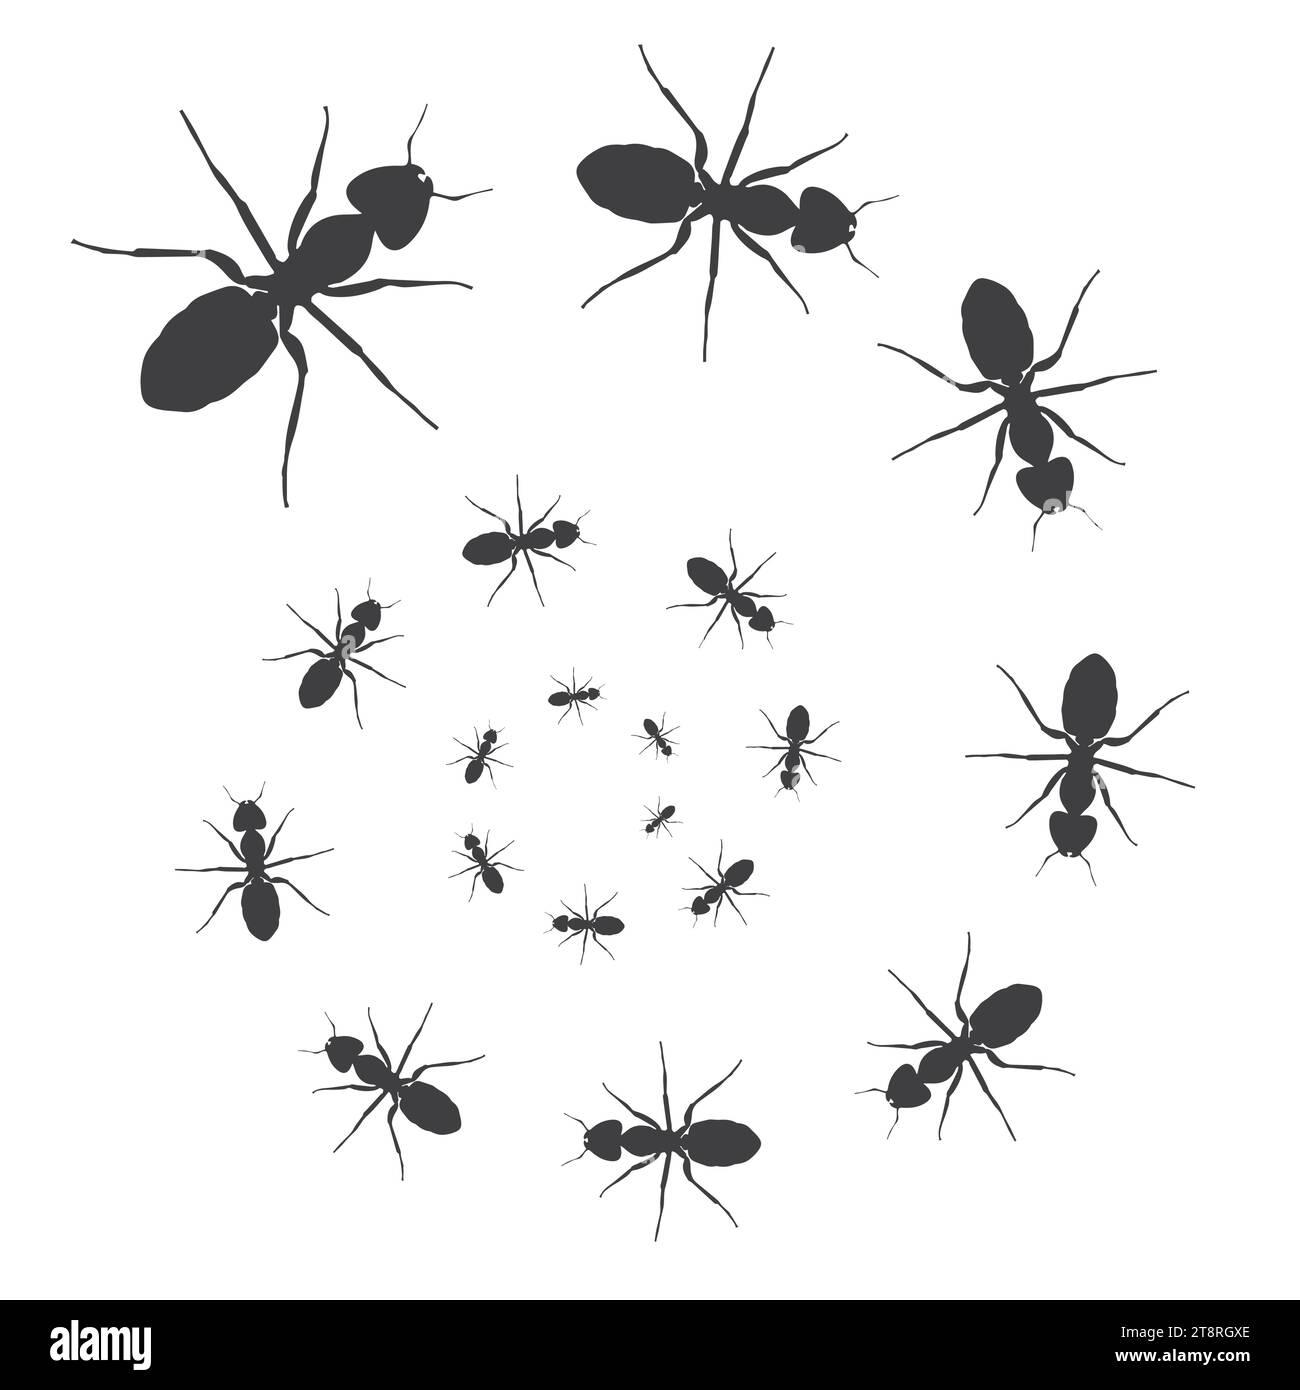 A line of worker ants marching in search of food. Vector illustration Stock Vector